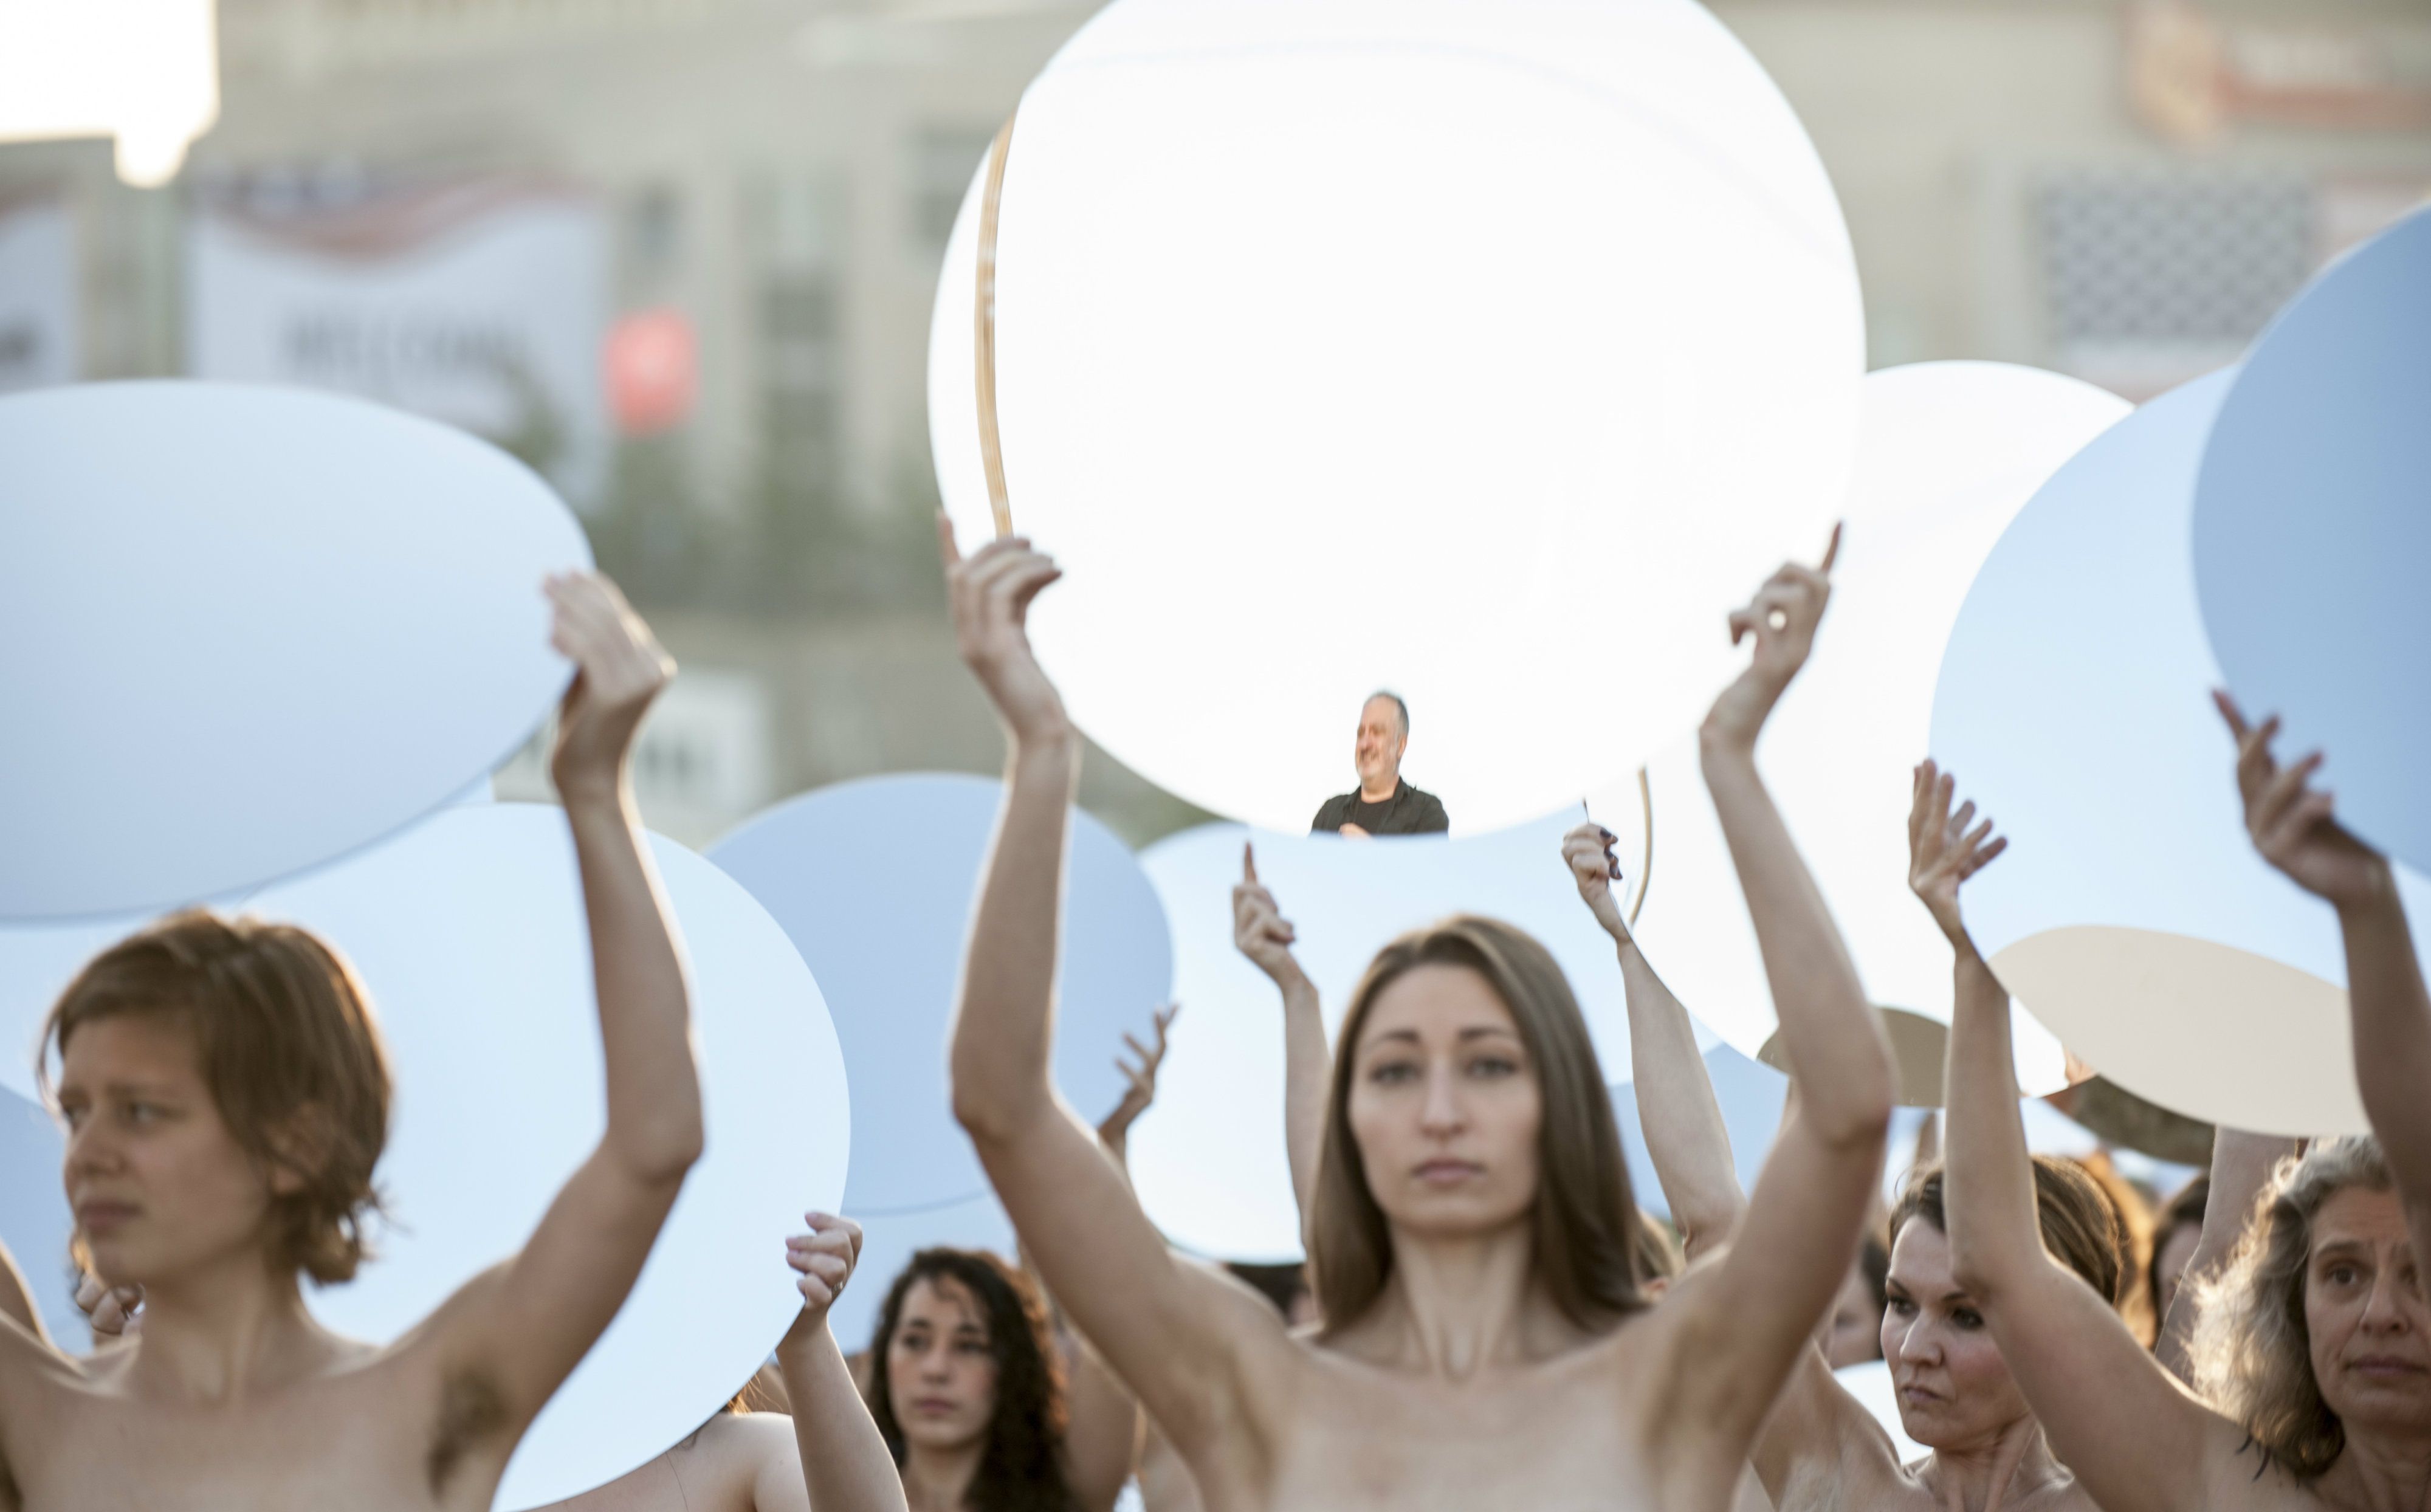 Nude Protest at Republican National Convention